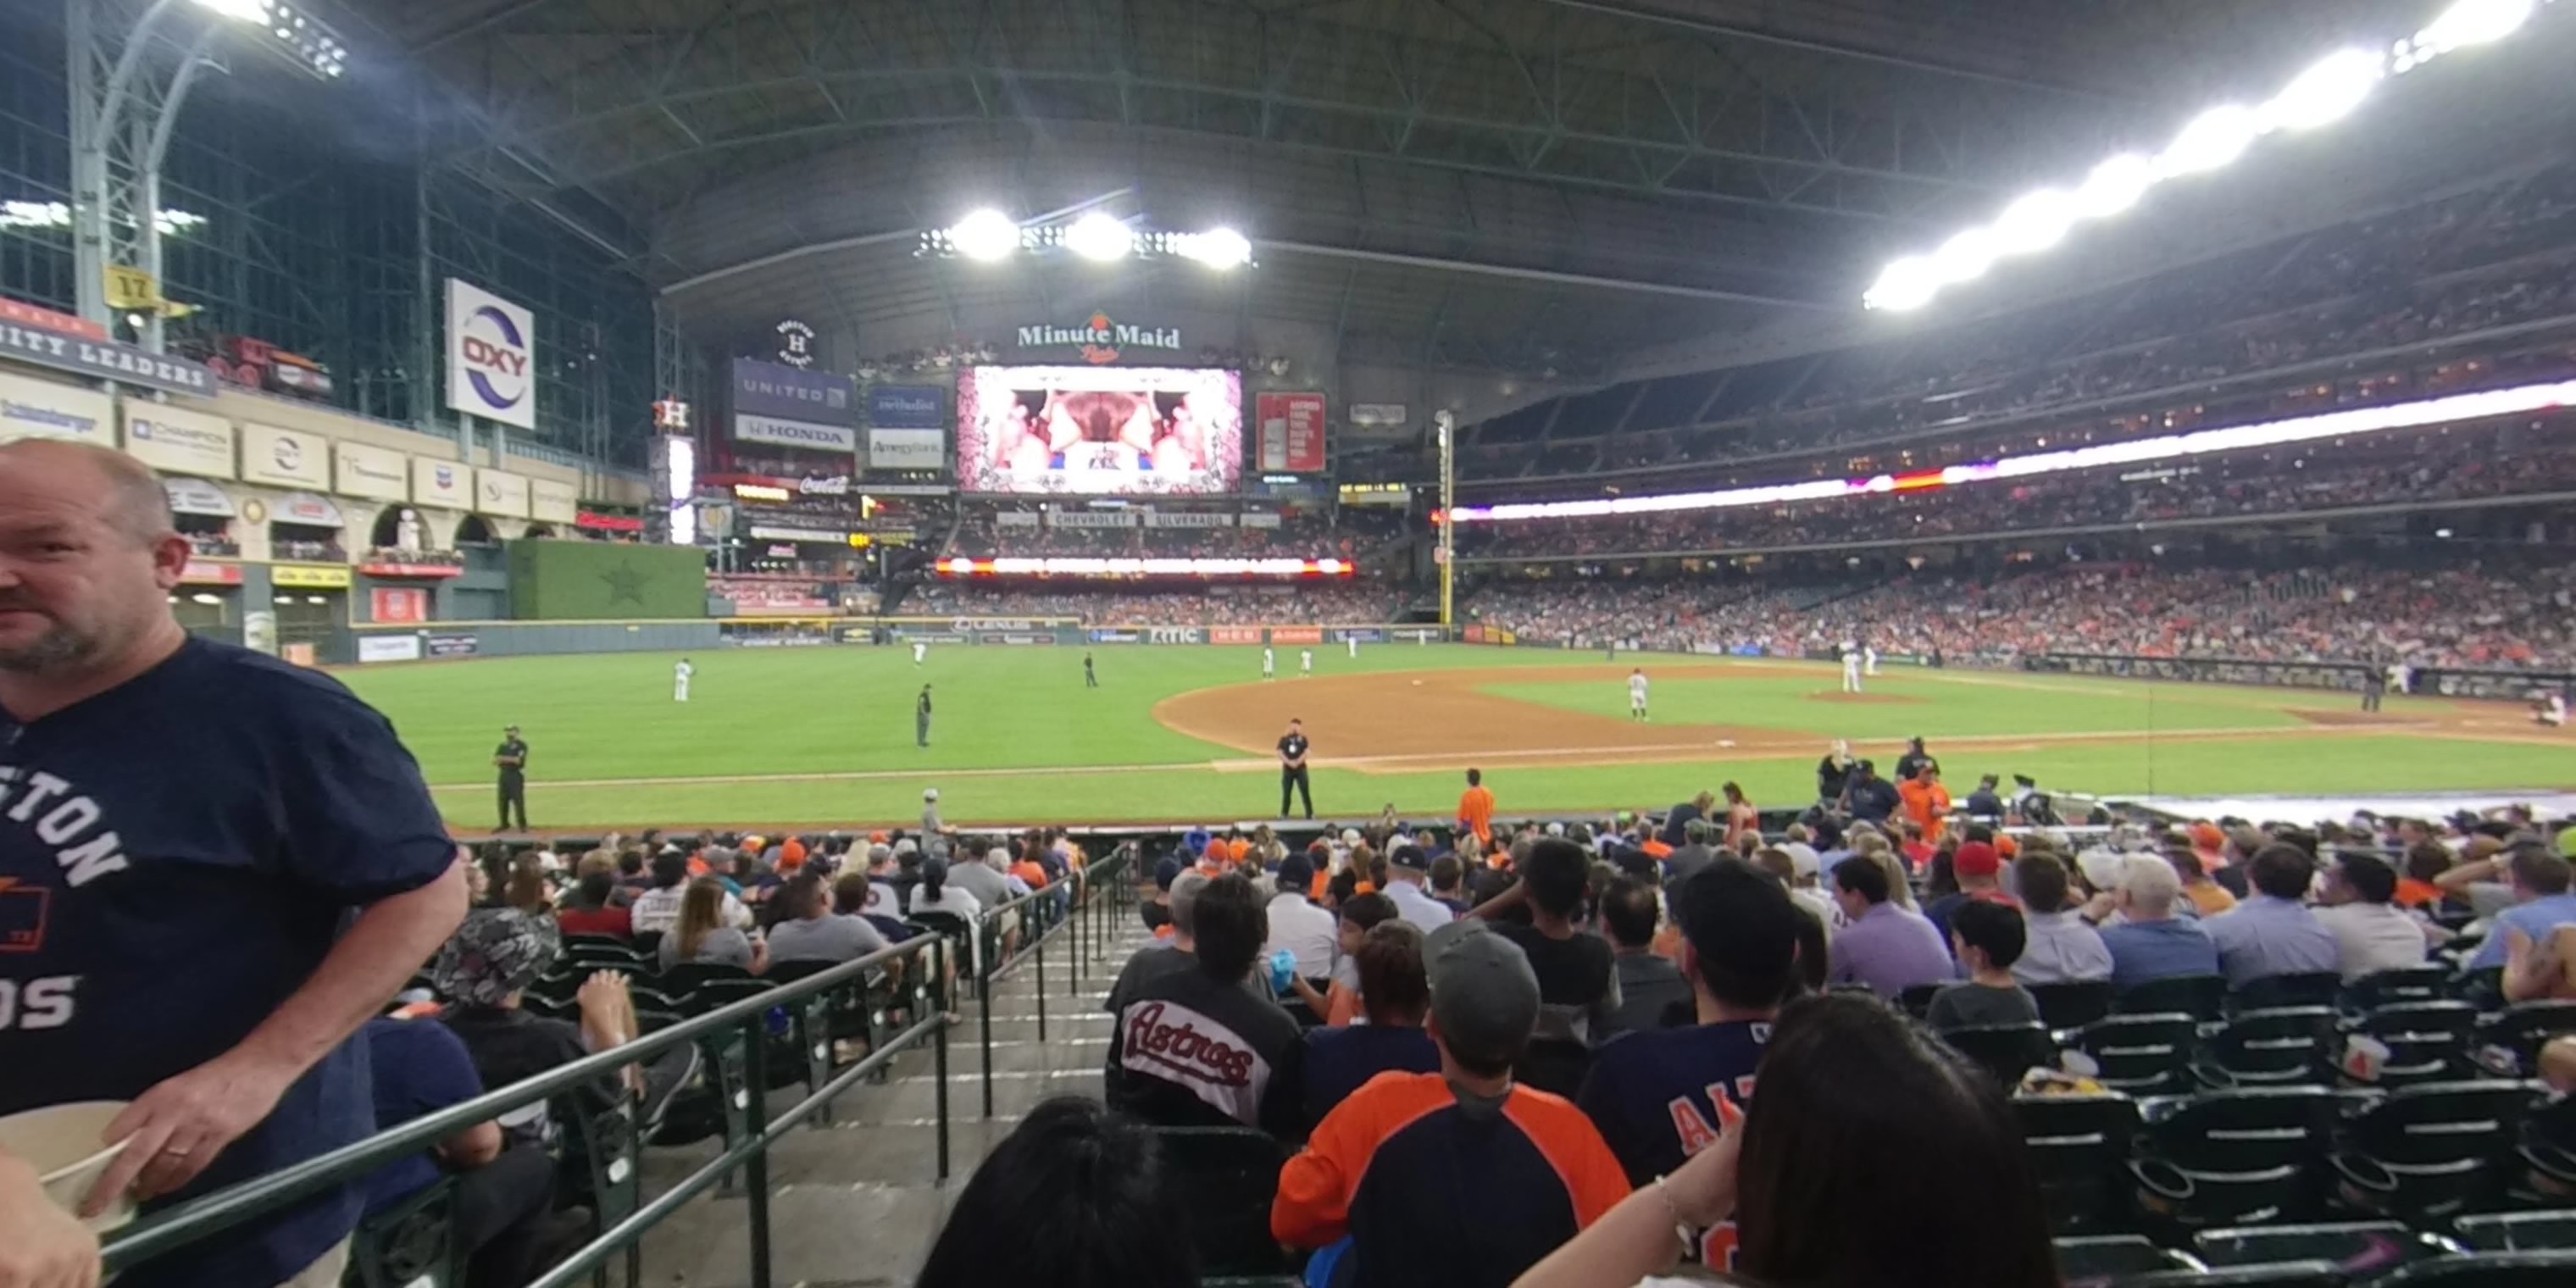 Section 110 at Minute Maid Park 